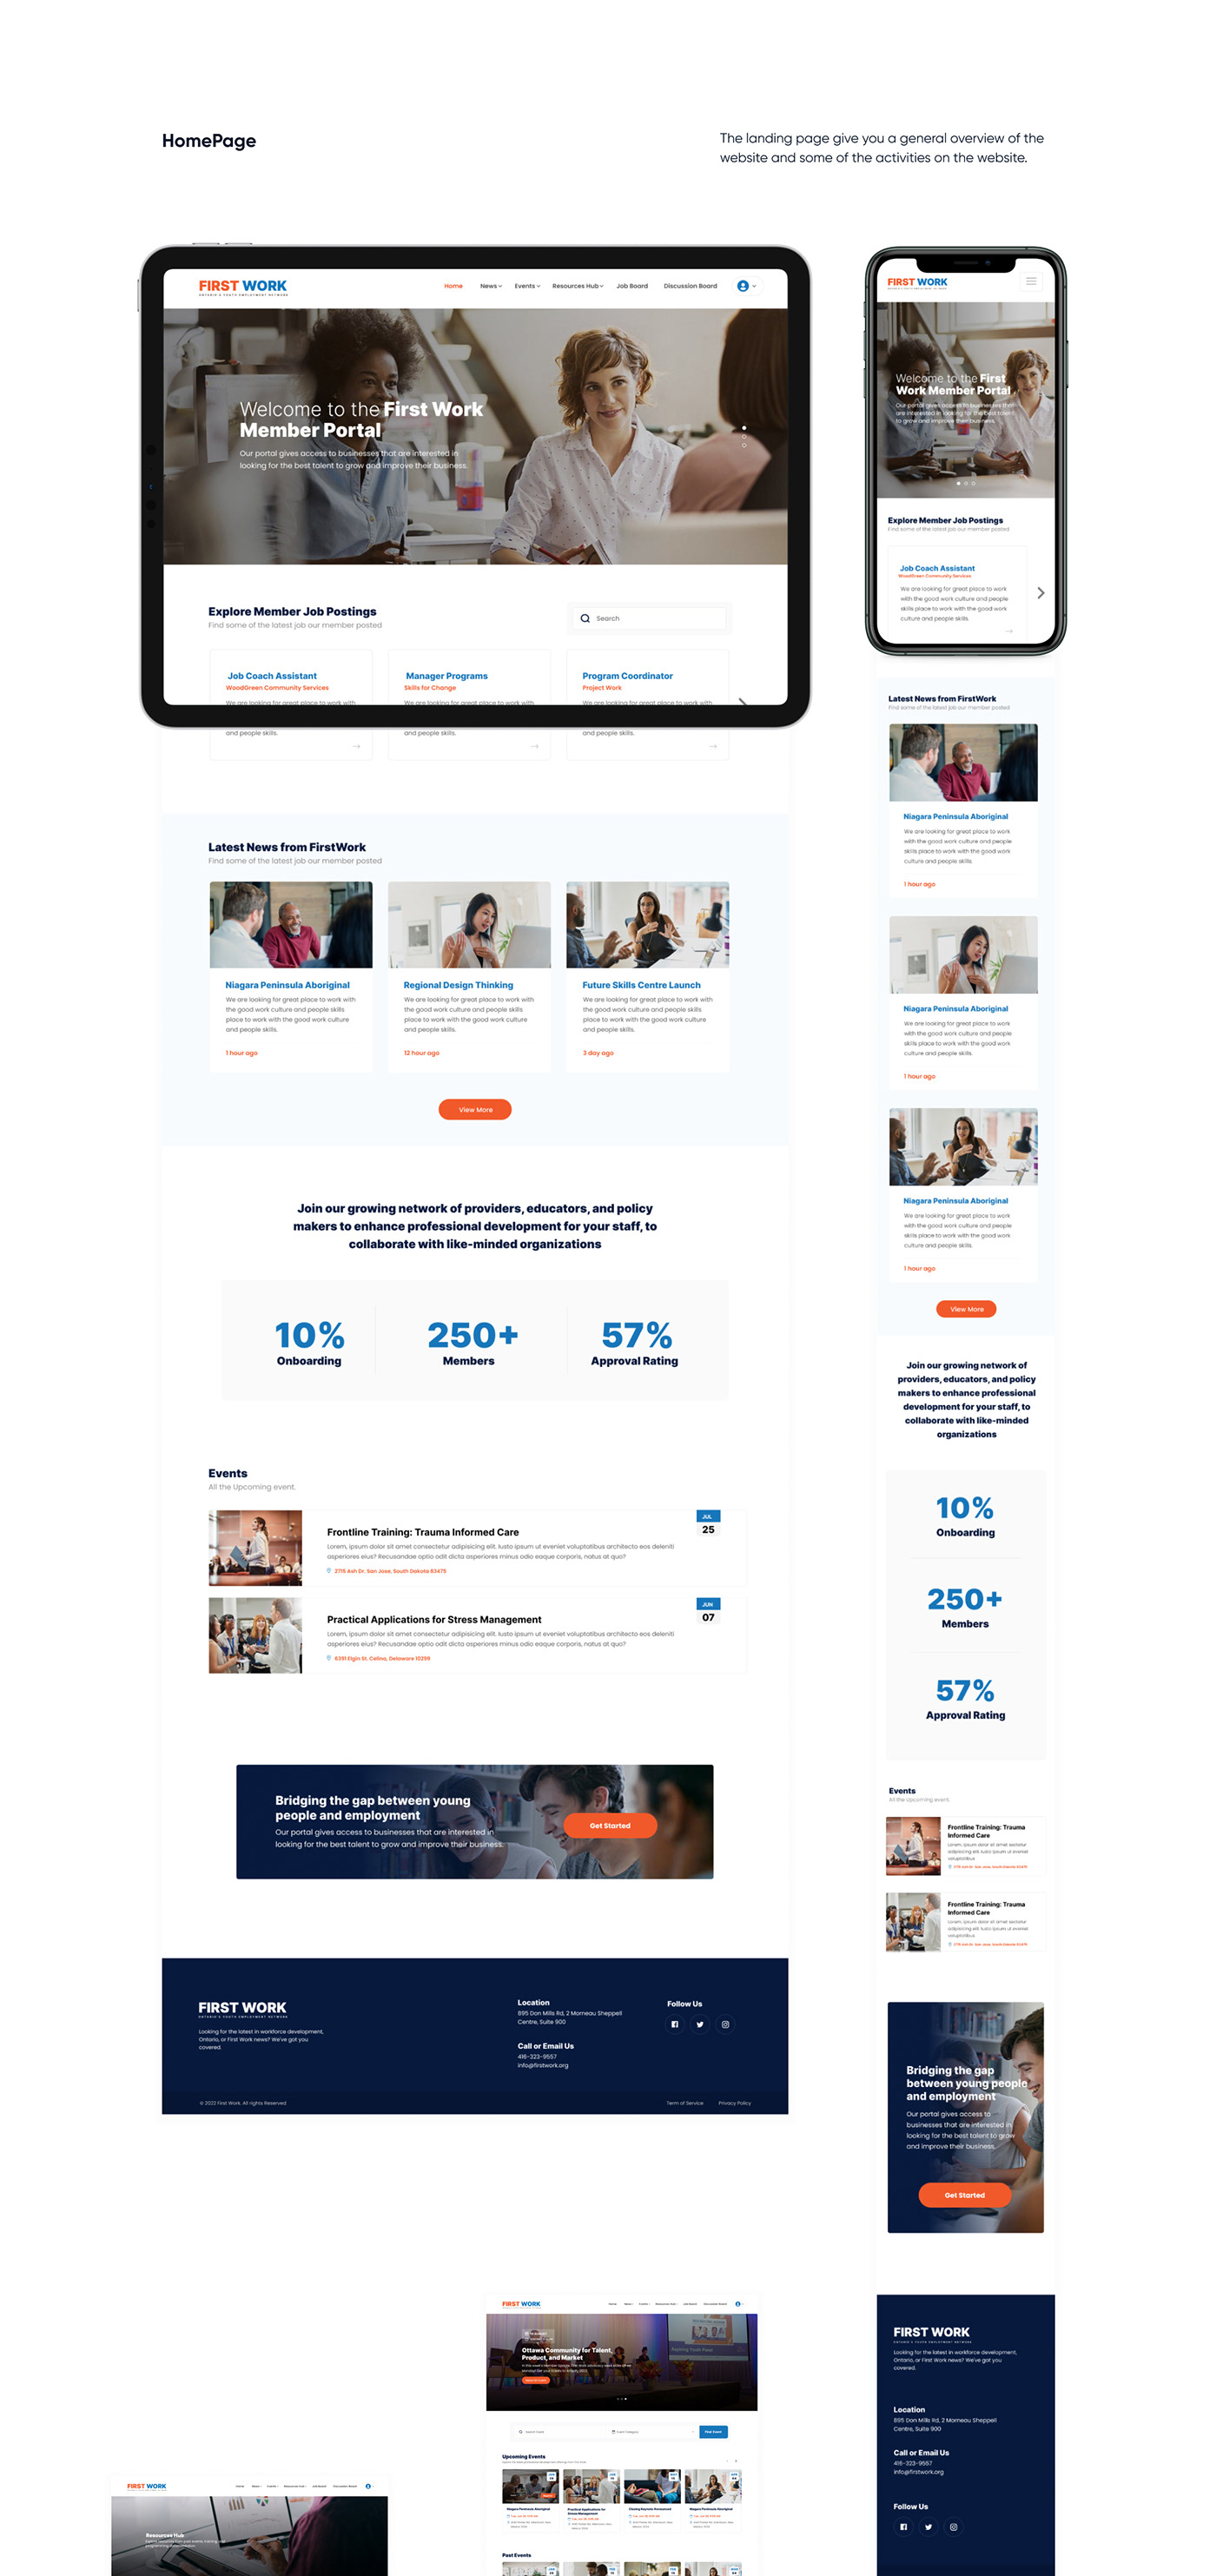 business Education Interface landing page student TAlent ui design UI/UX user experience Web Design 